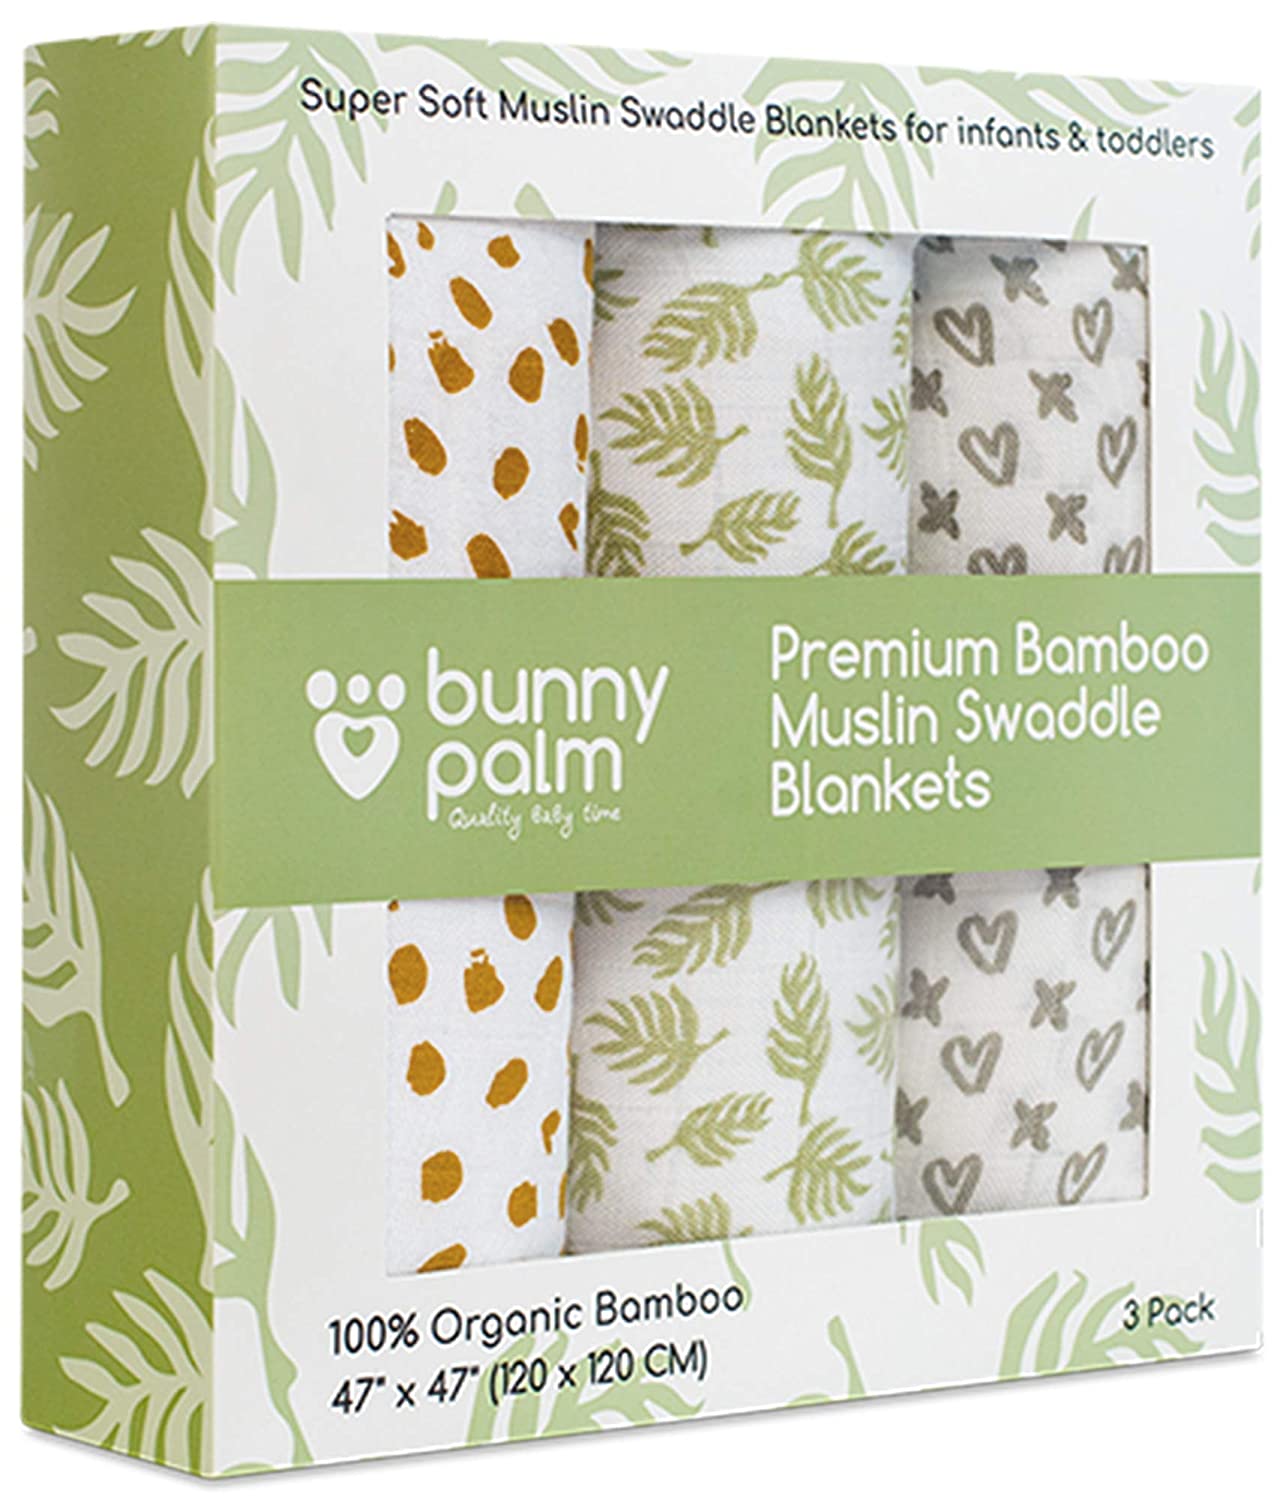 Bunny Palm Bamboo Muslin Swaddle Blanket, 3-Pack